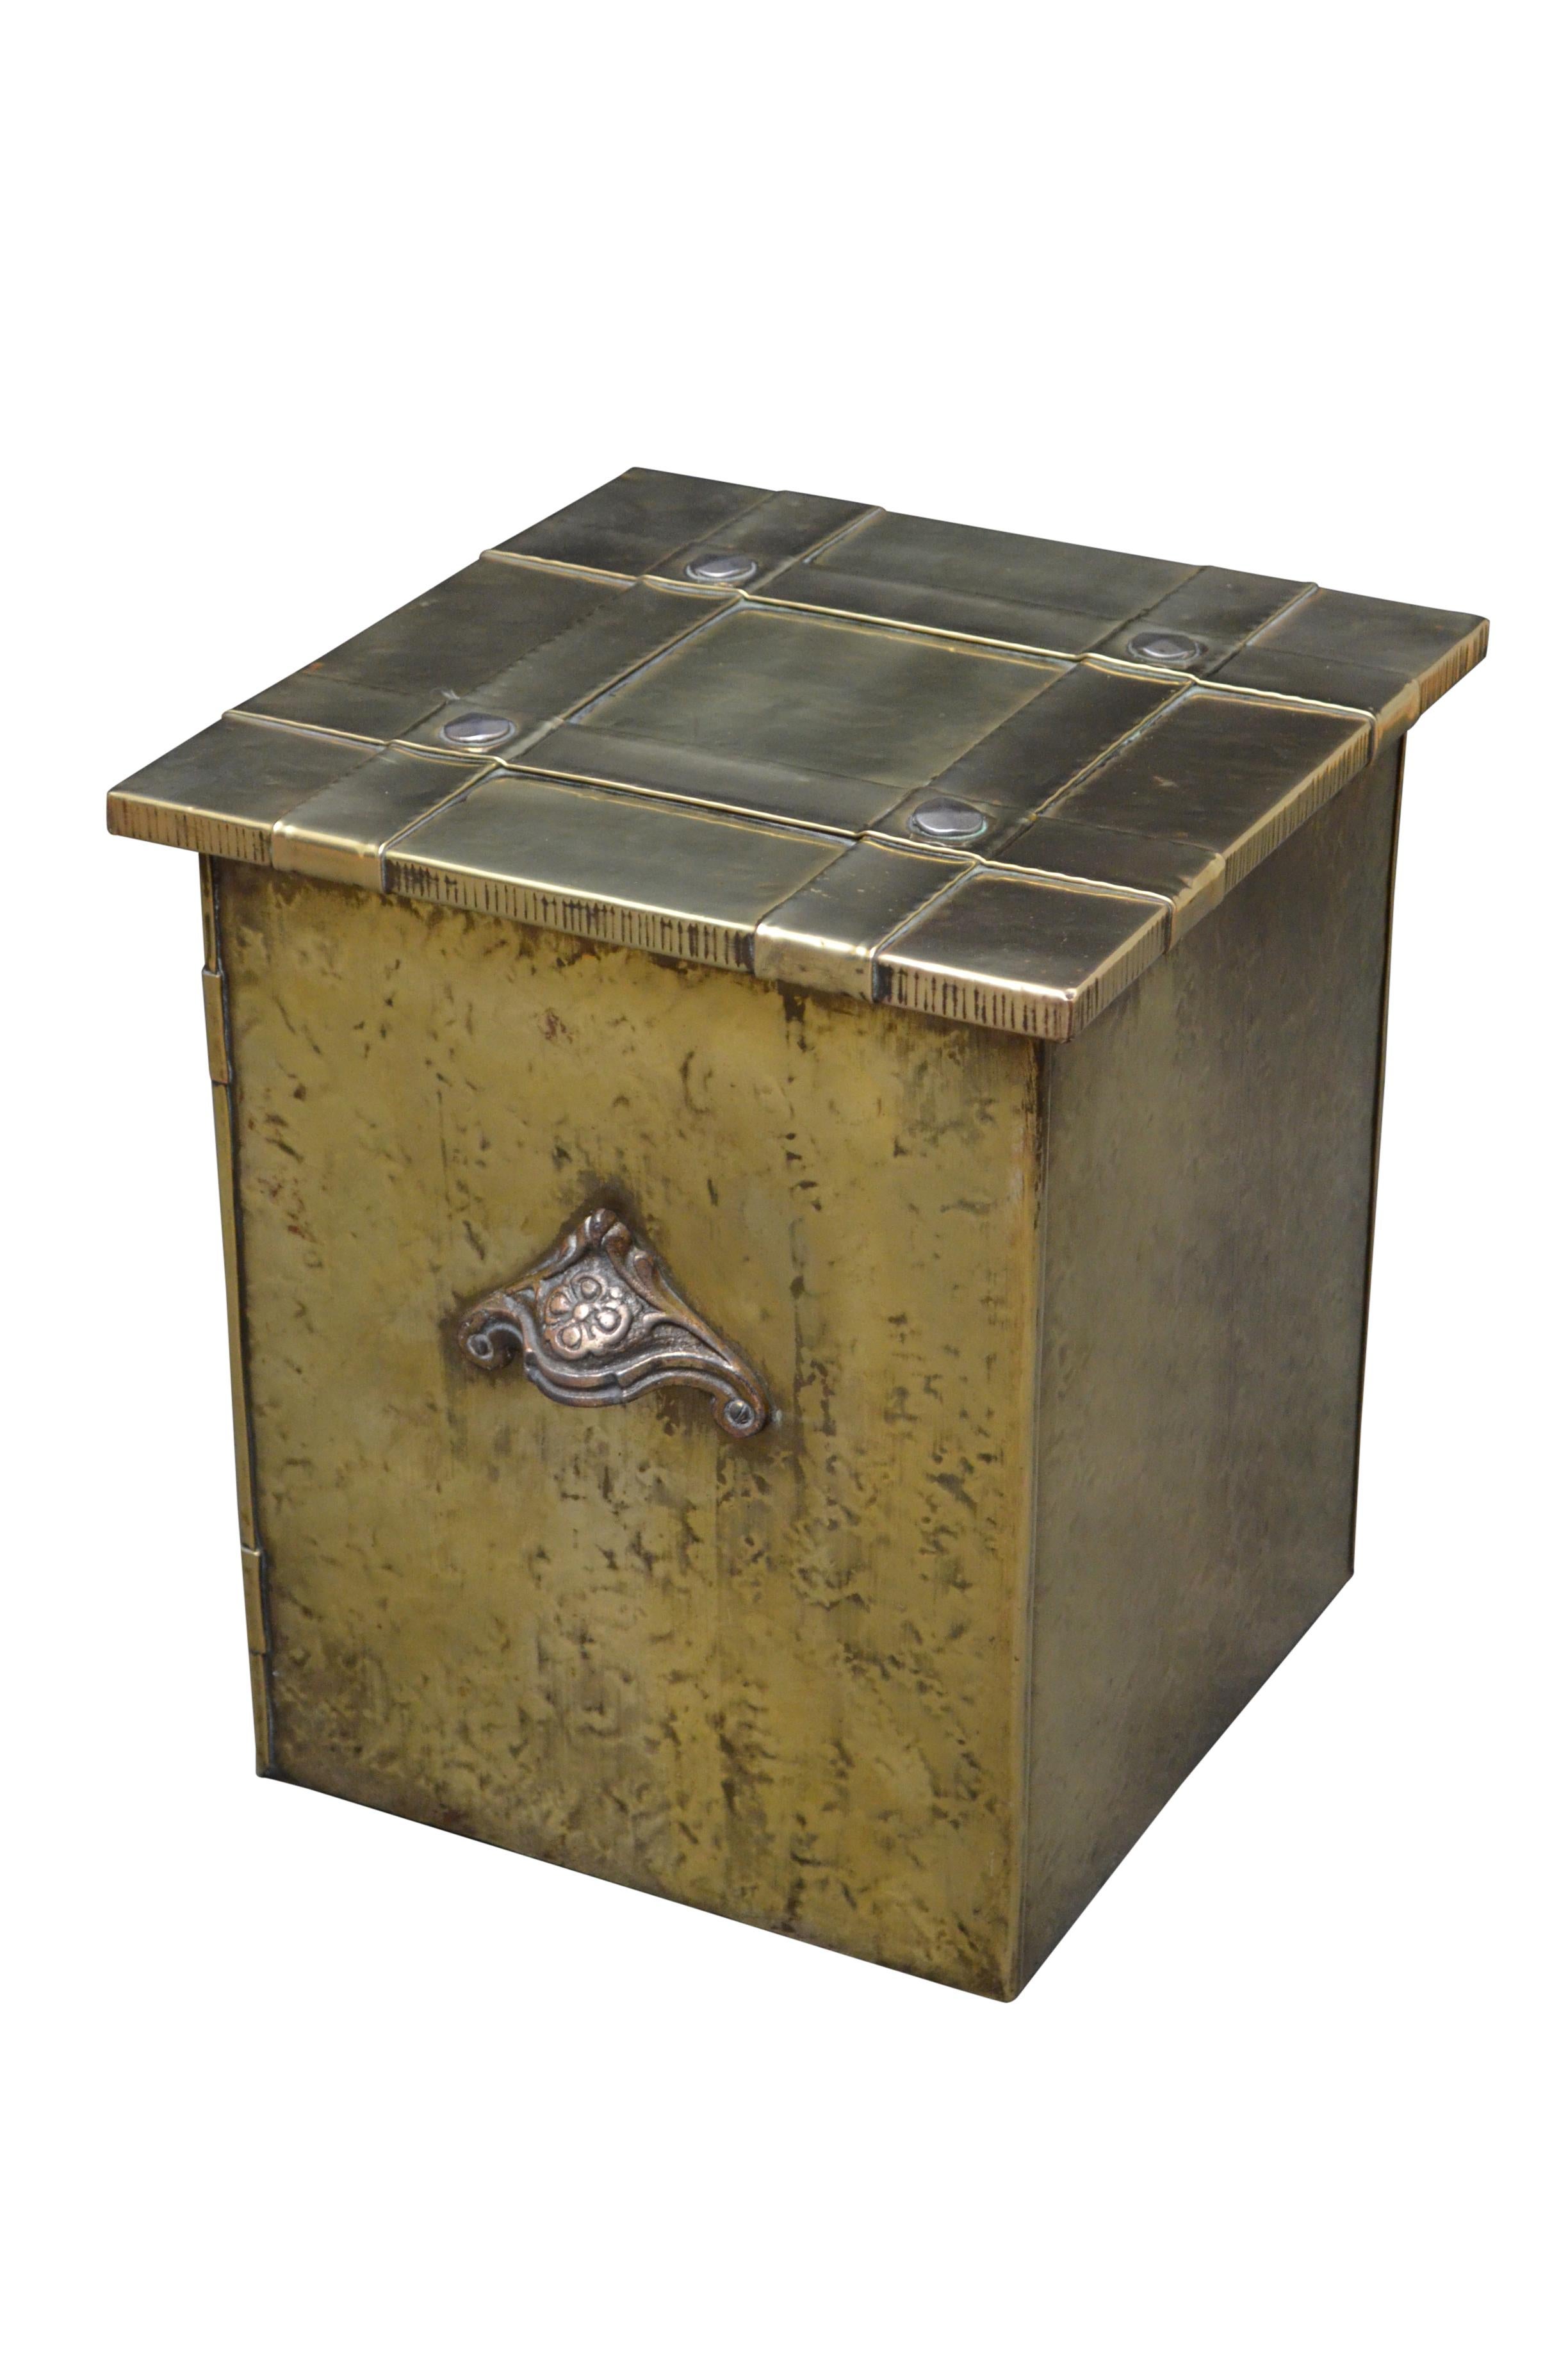 European Arts and Crafts Coal Bin For Sale